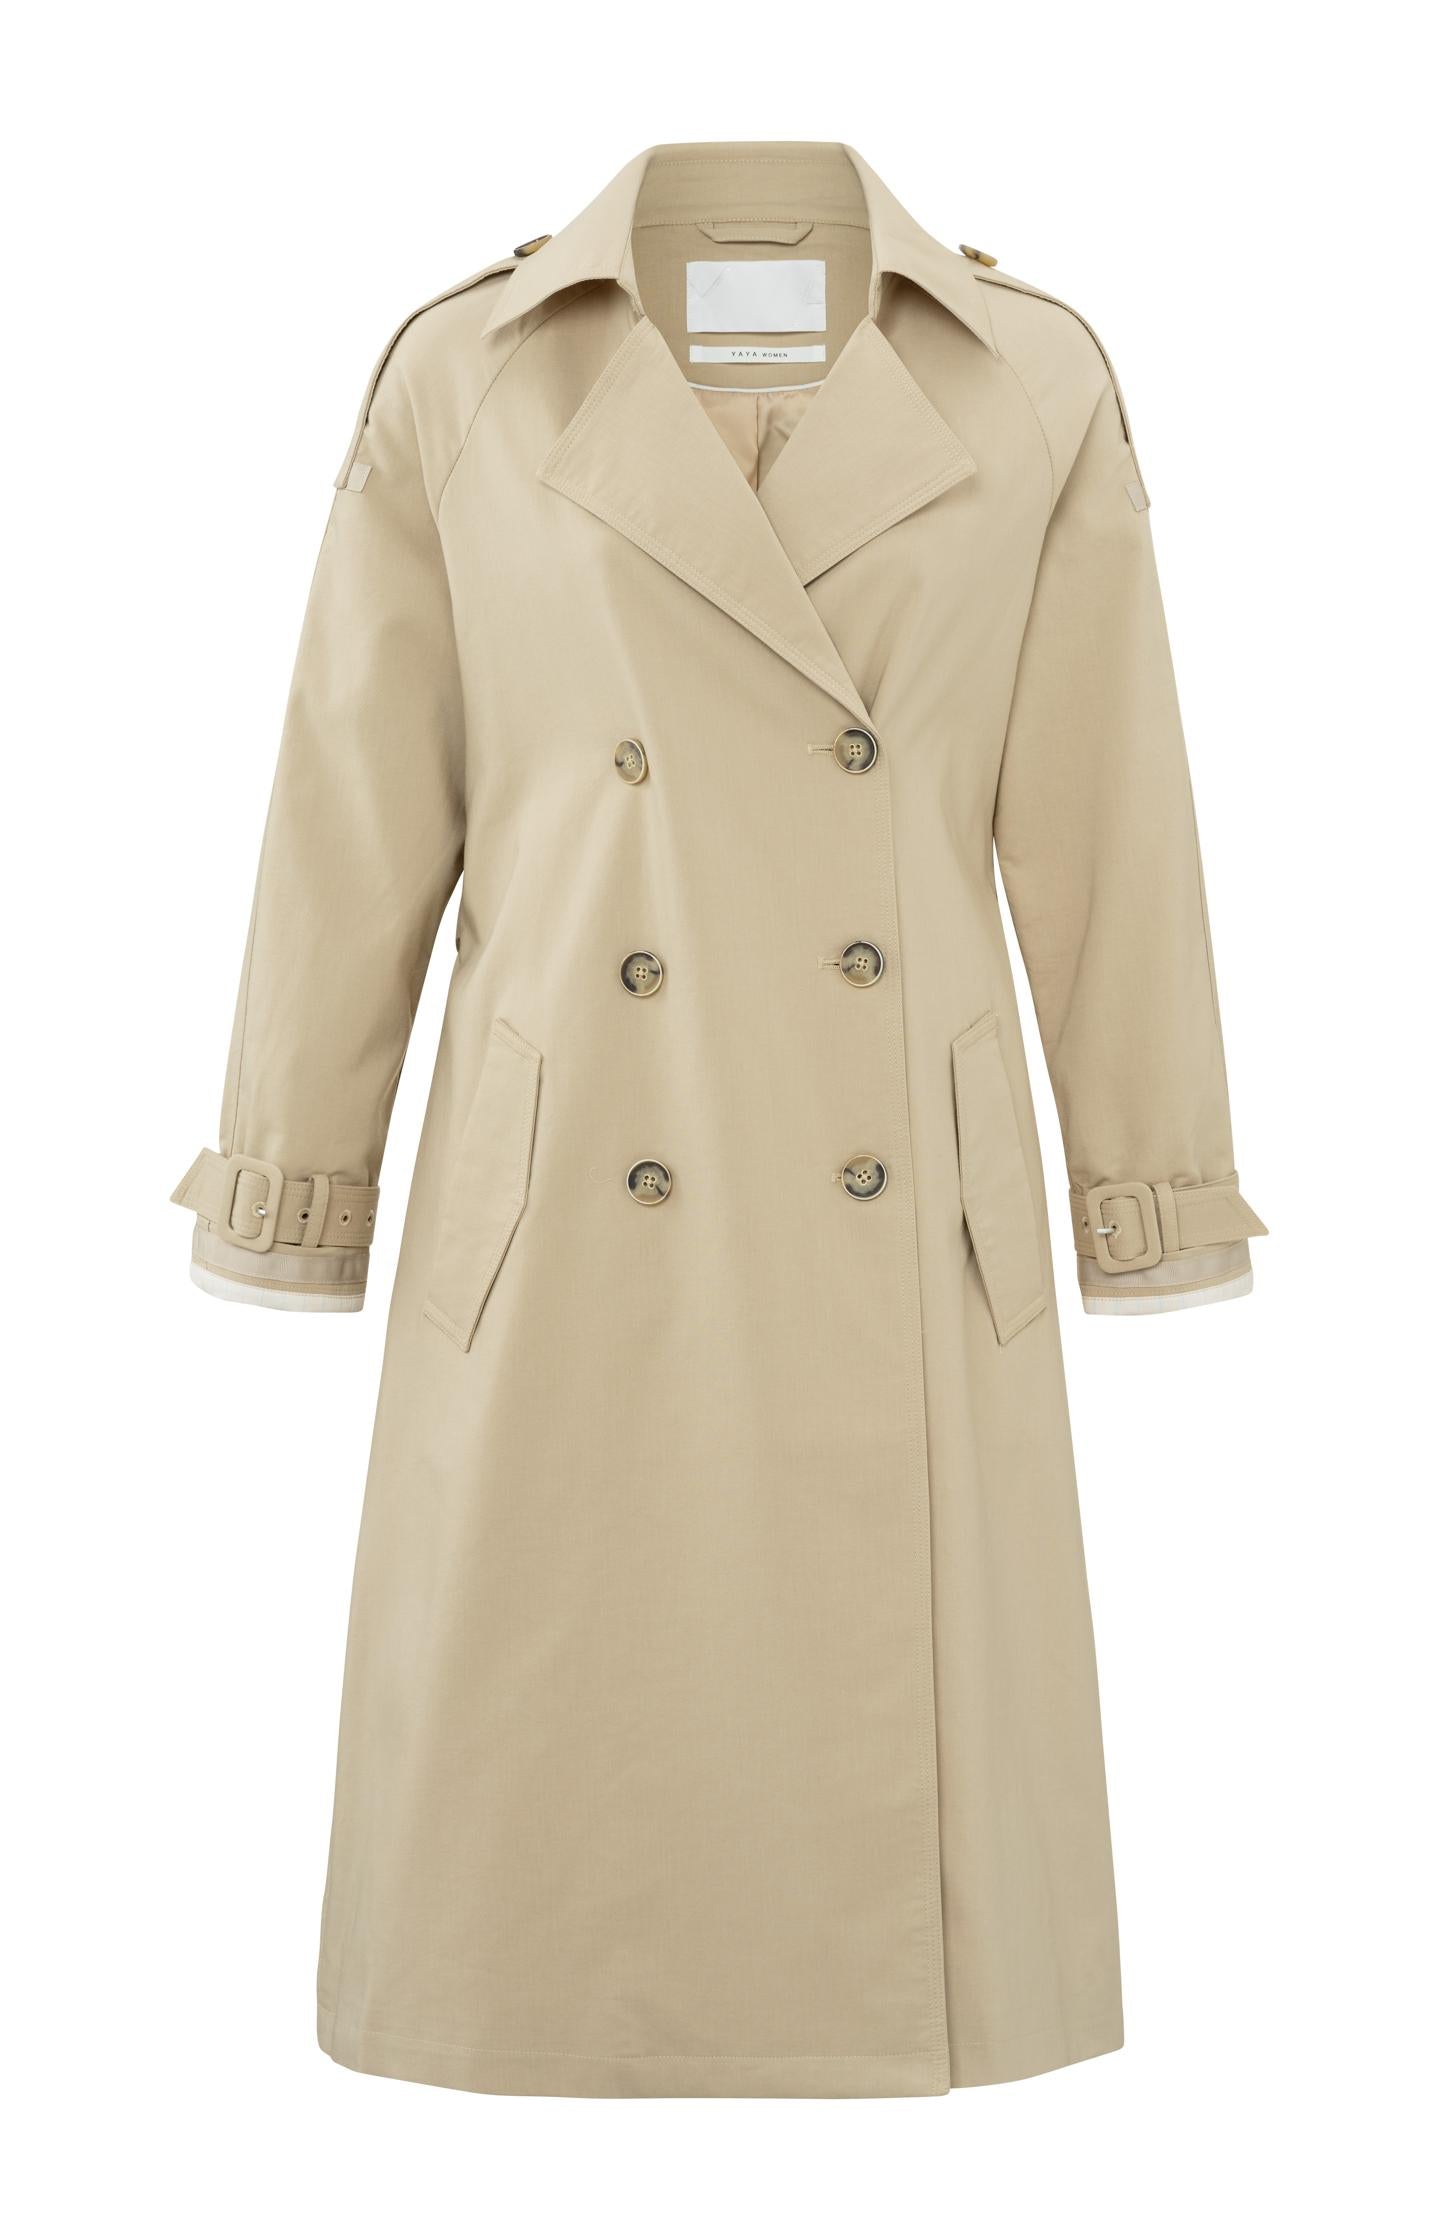 Double breasted trench coat with long sleeves, pockets and belt - Type: product